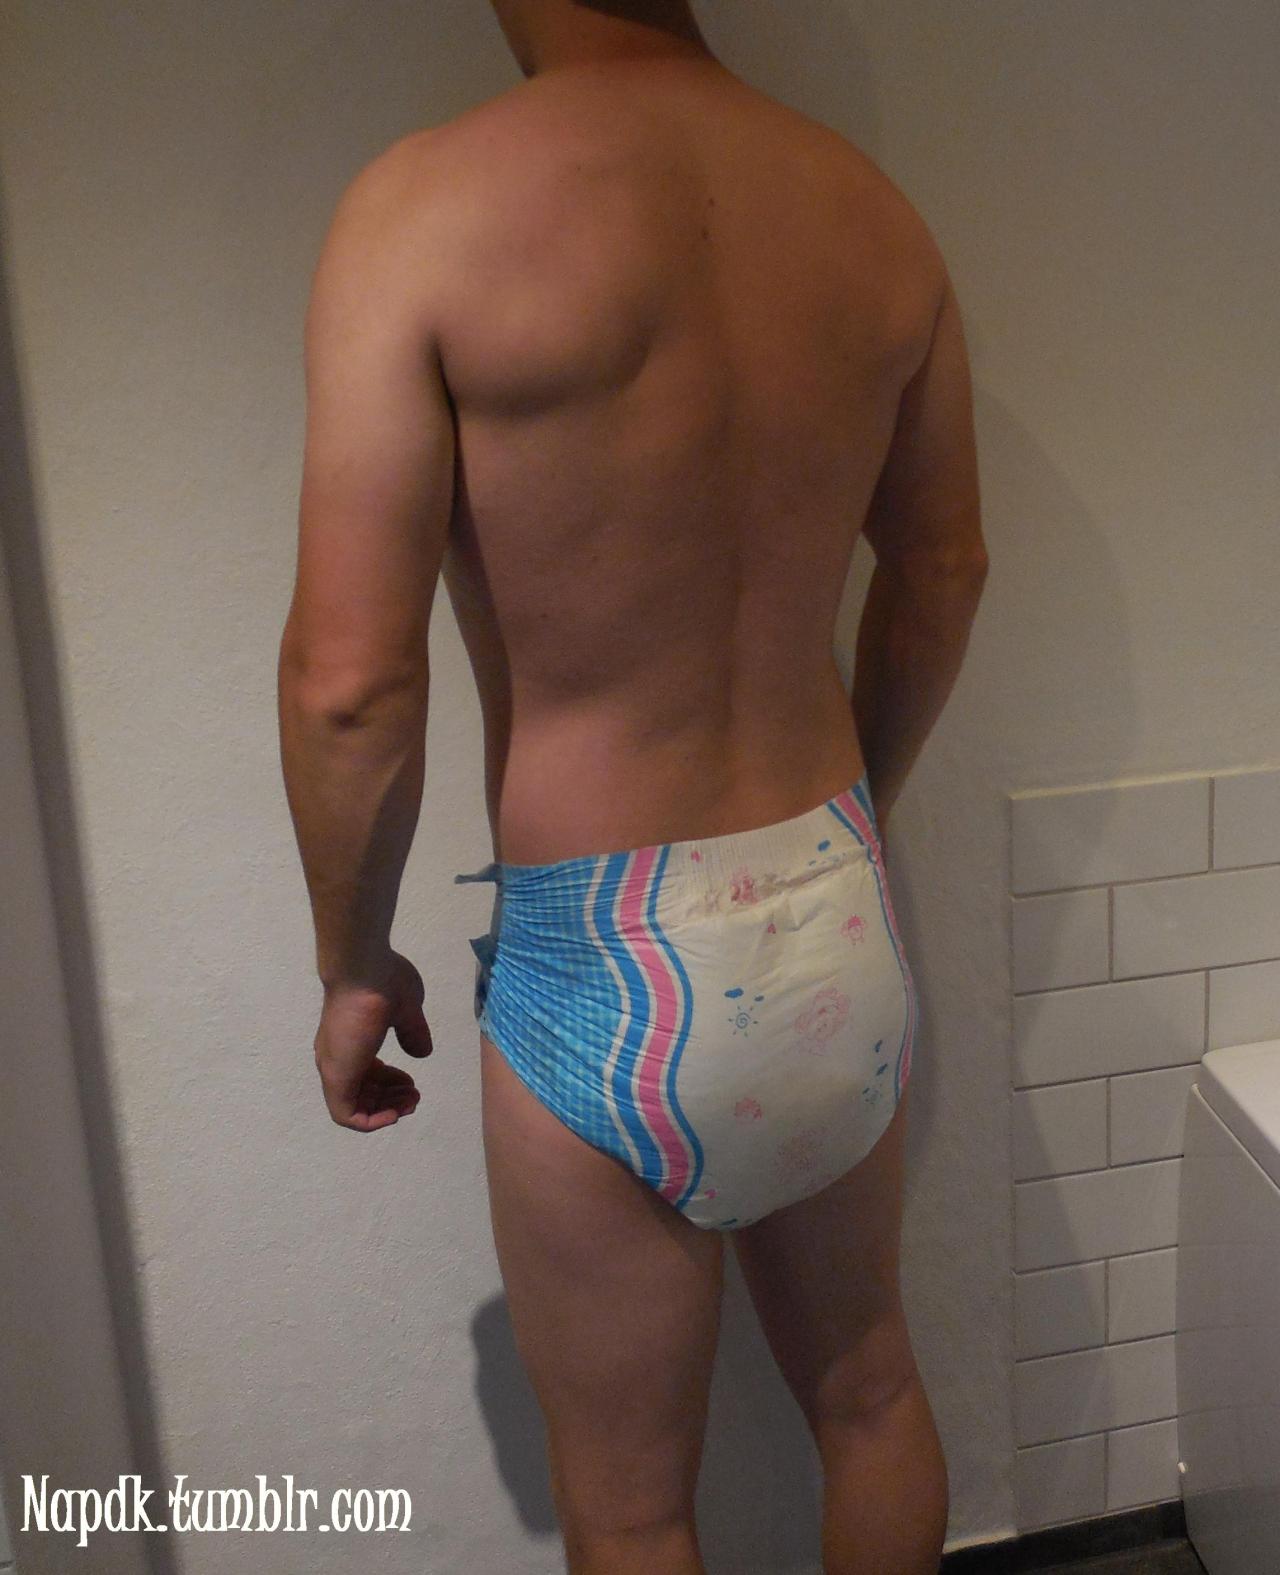 napdk:  I often wear diapers in public or around friends and family. But I find it